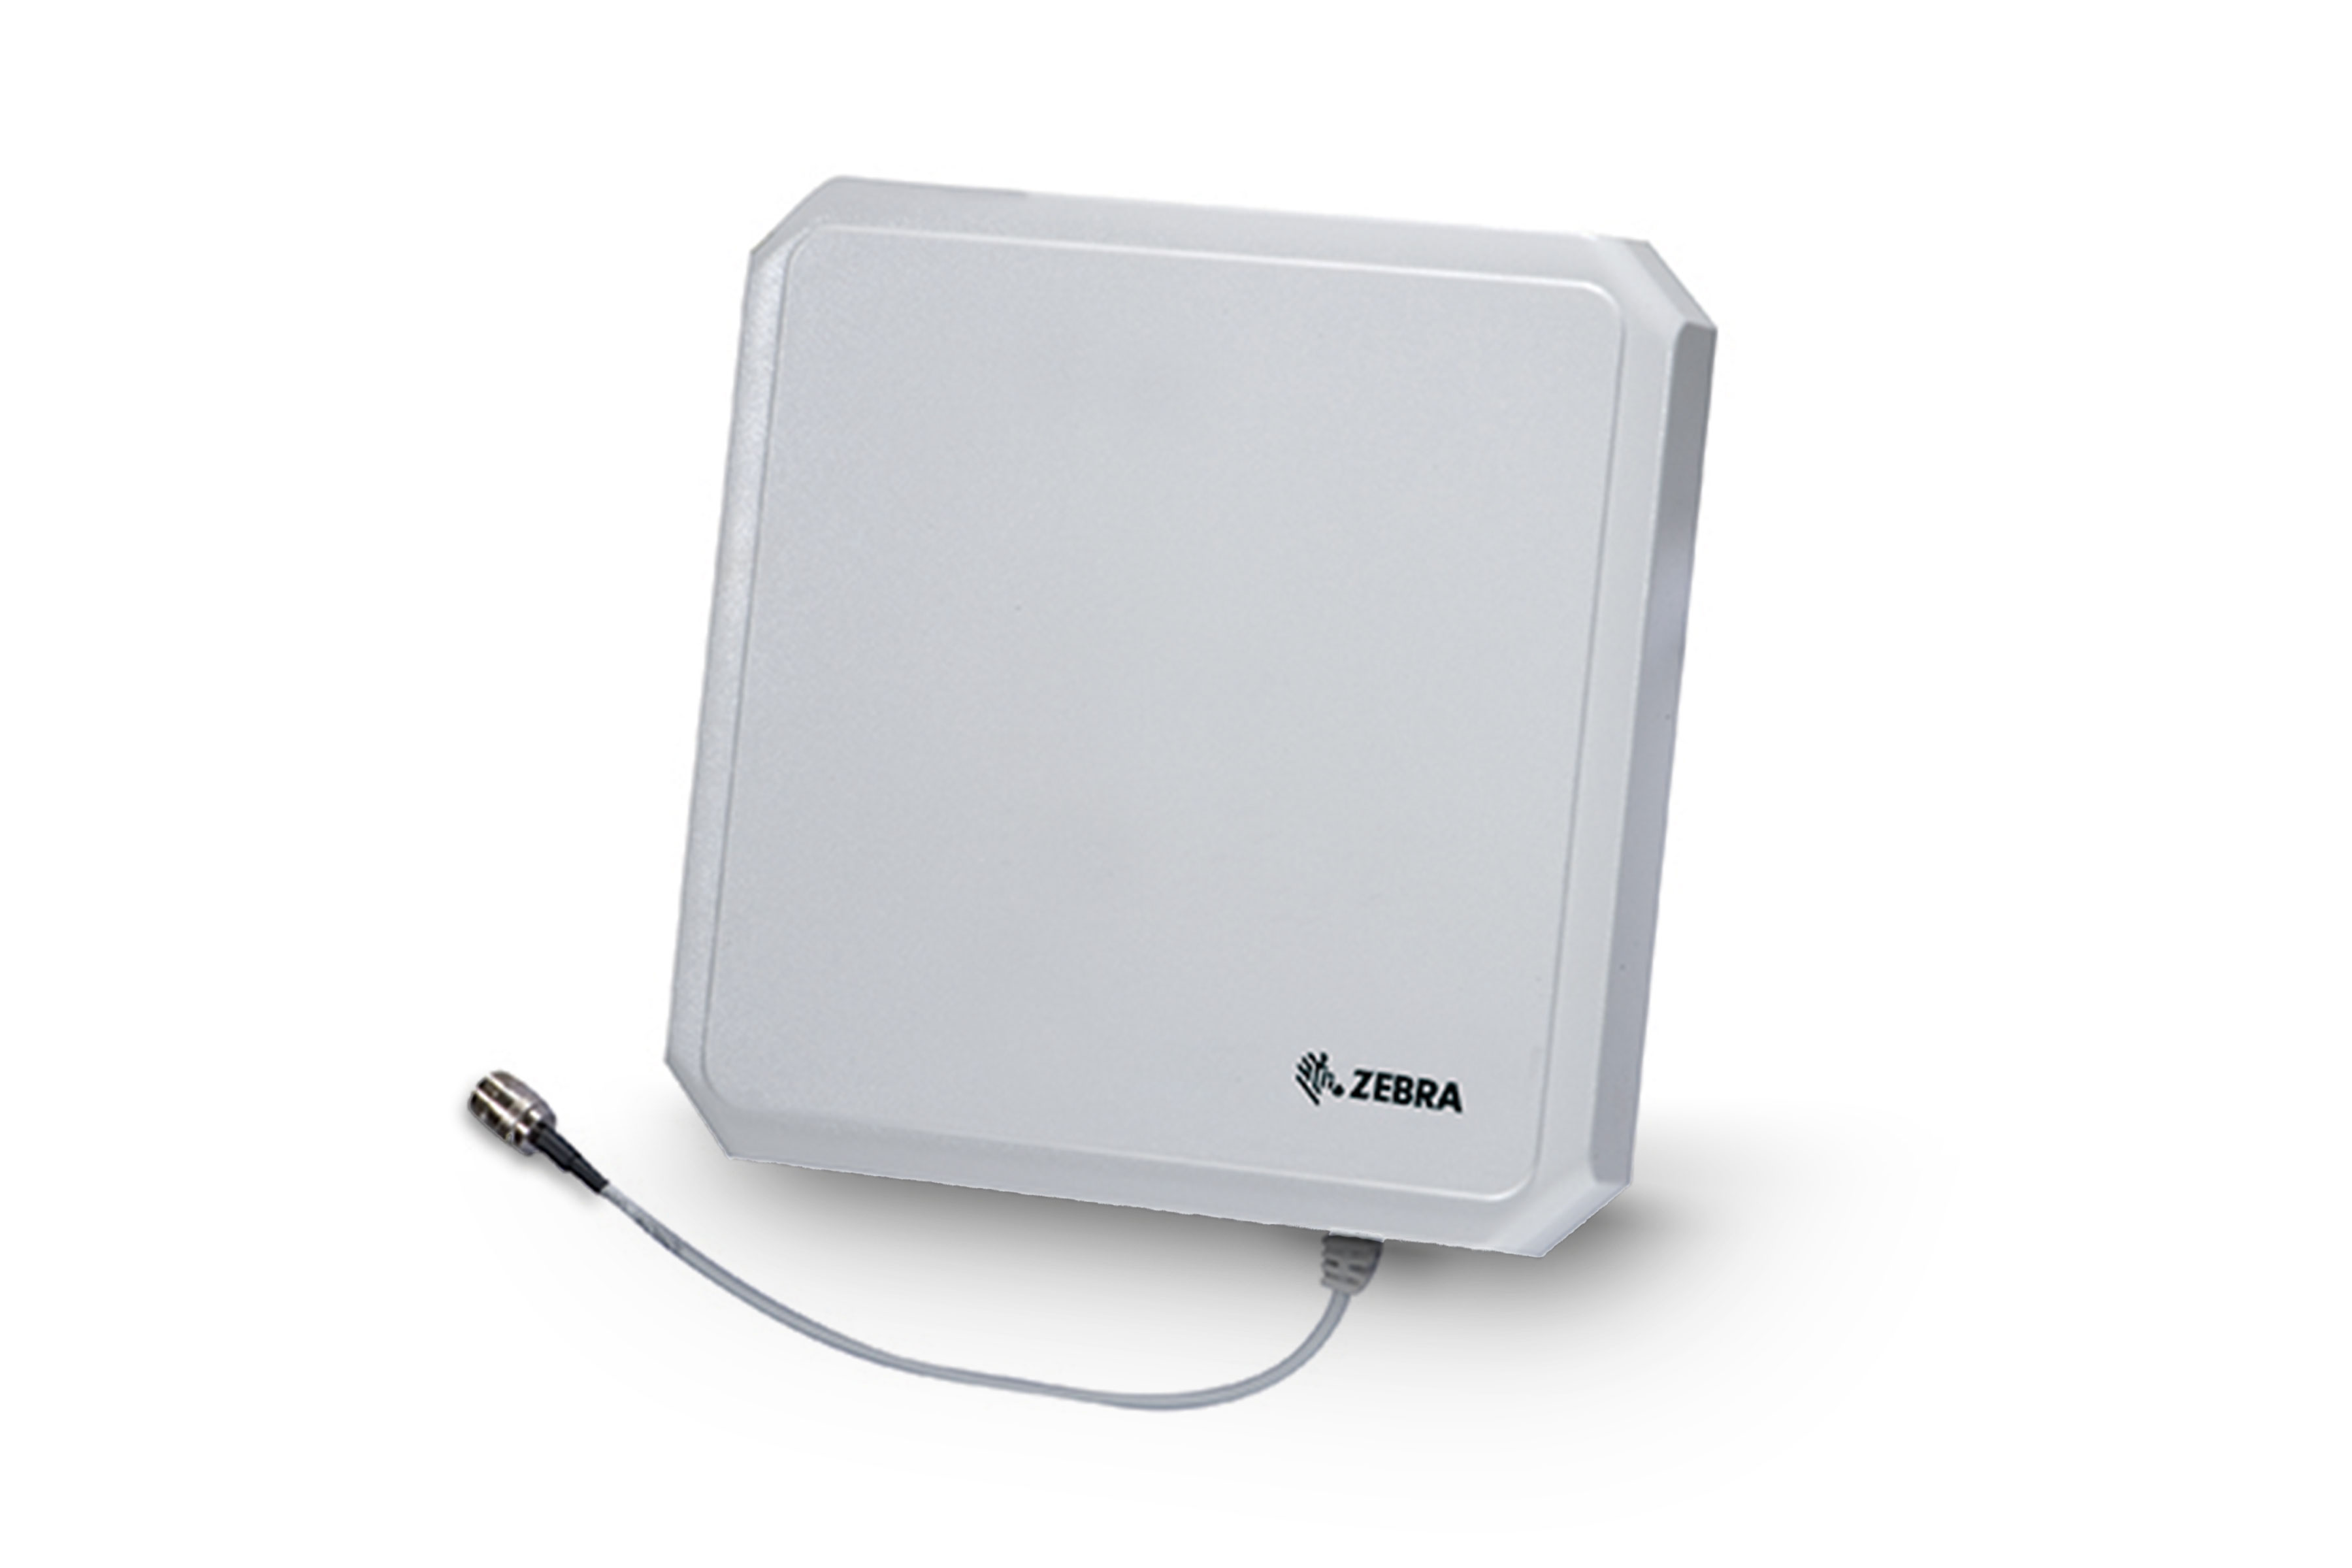 Zebra AN480 RFID antenna with single port and low axial ratio